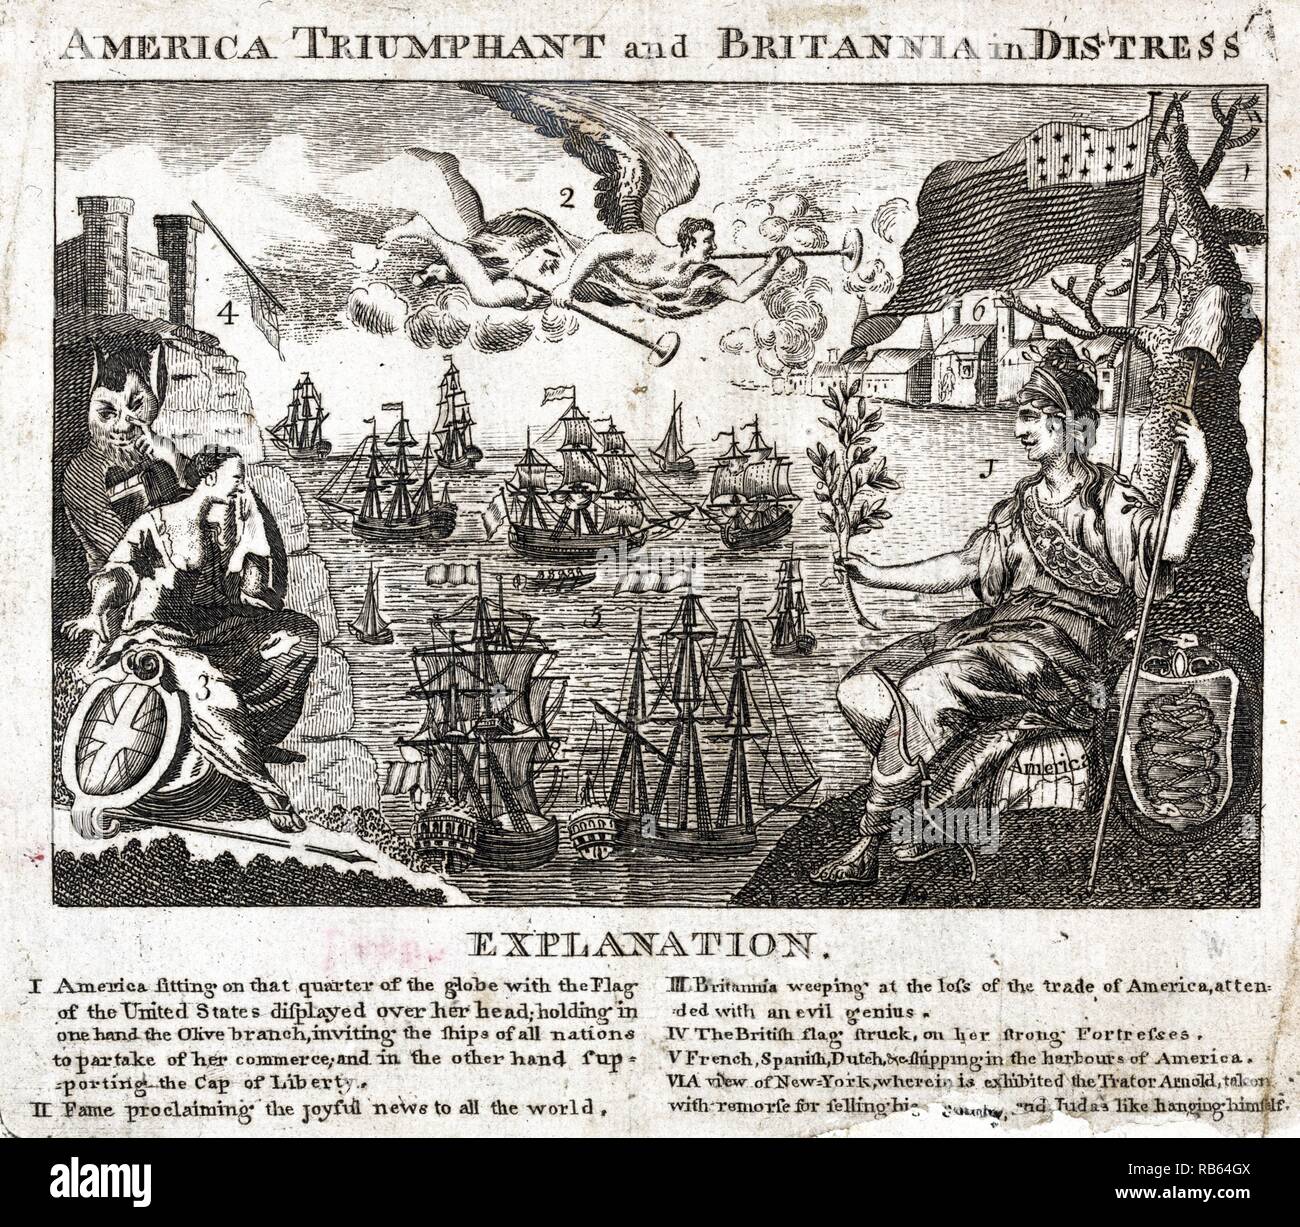 America triumphant and Britannia in distress. 1782 allegory of American prosperity and victory over England. Stock Photo